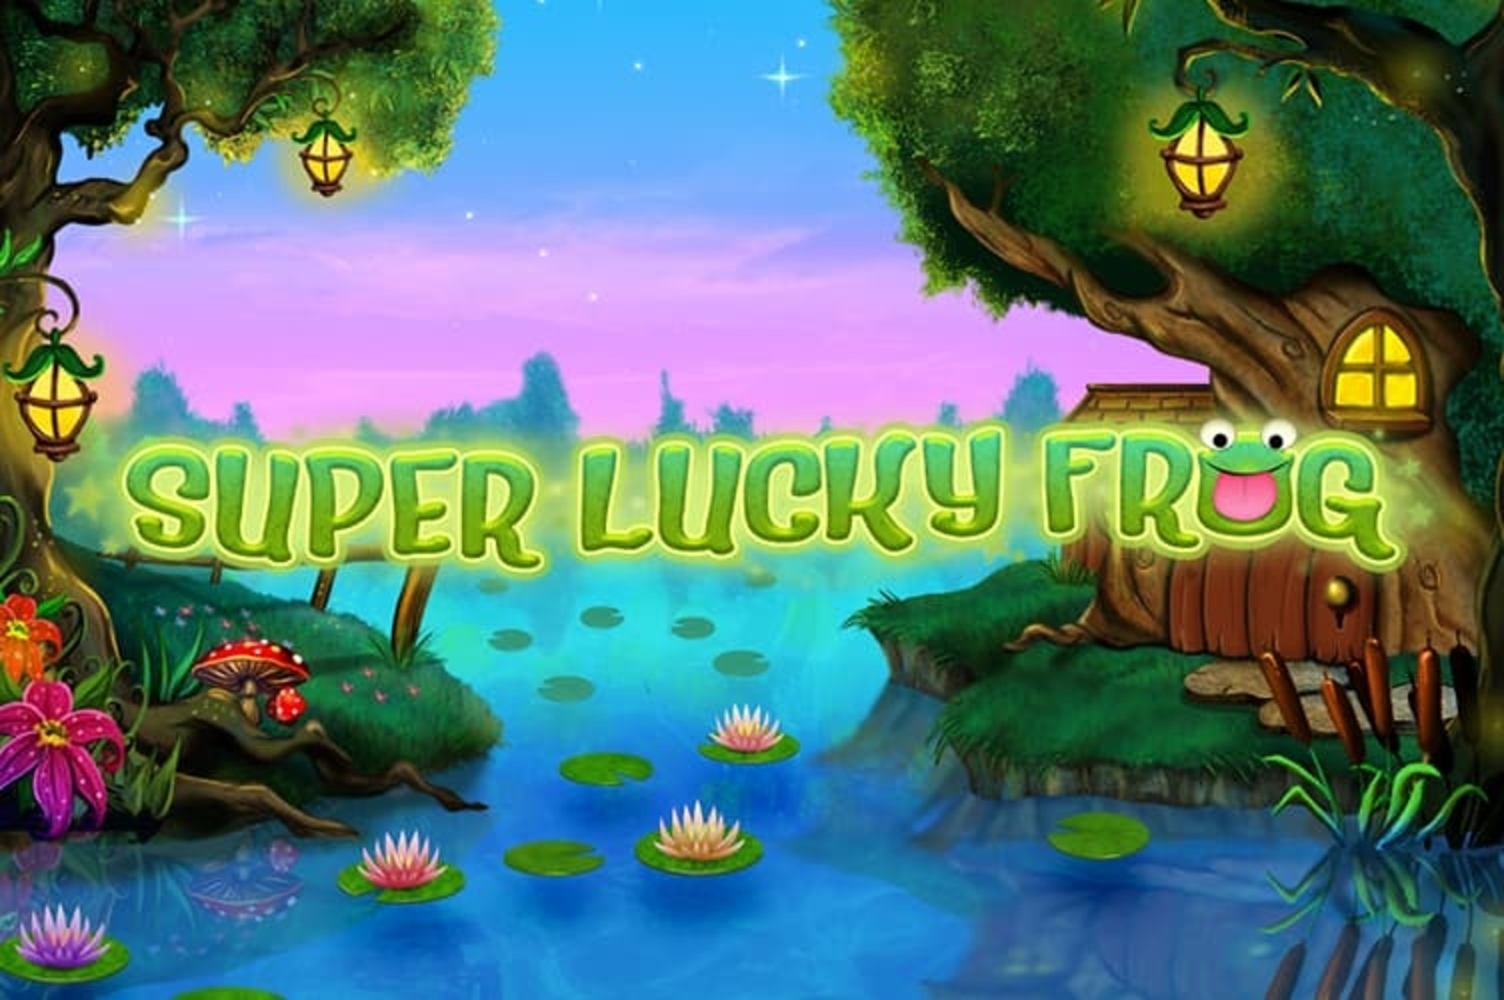 The Super Lucky Frog Online Slot Demo Game by NetEnt